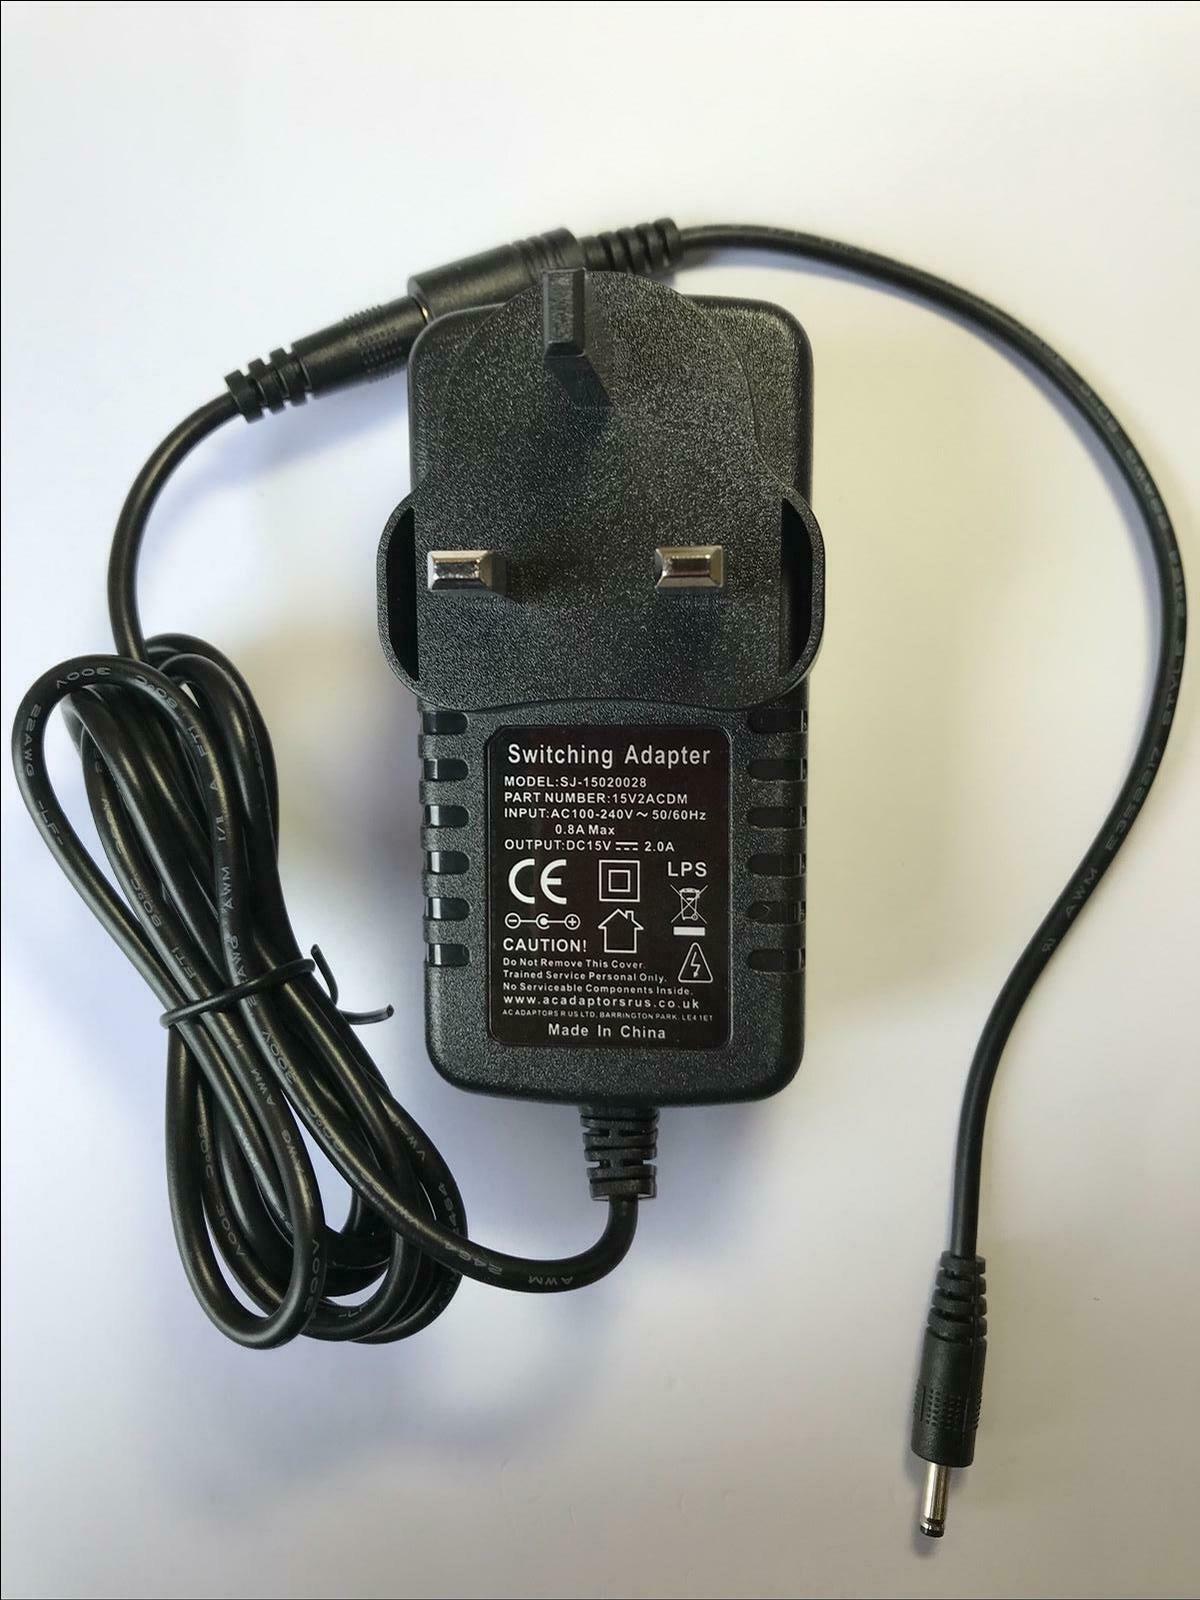 NEW 15V 2.0A 2A 1.5A AC-DC Switching Adapter with 3.5mm x 1.3mm Tip